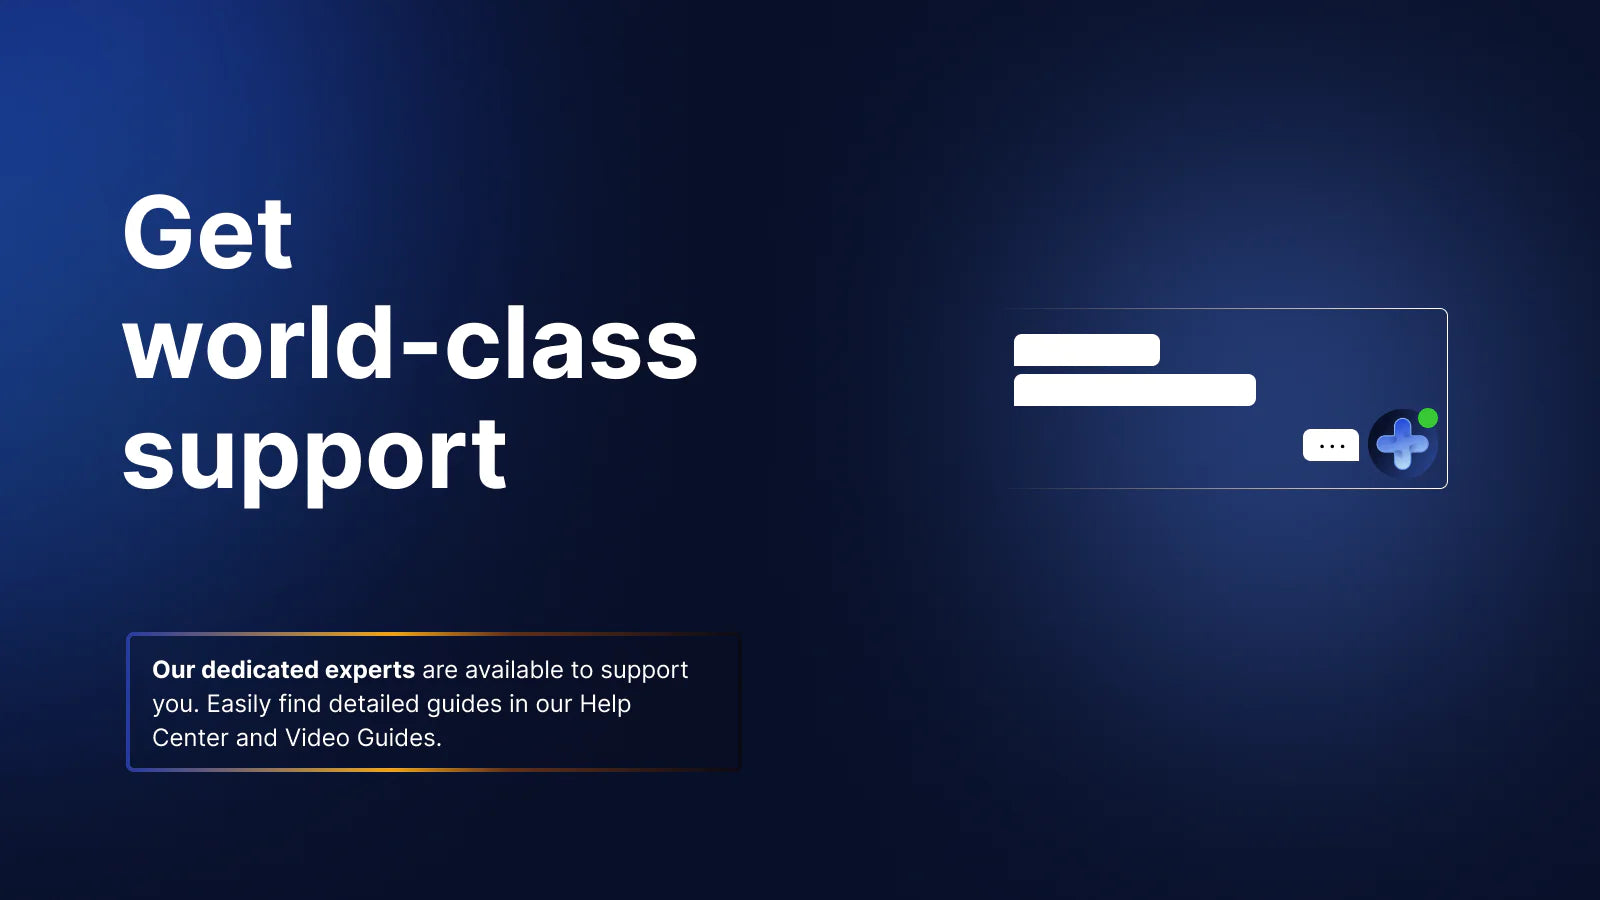 the image shows that you can get a world class support and video guides